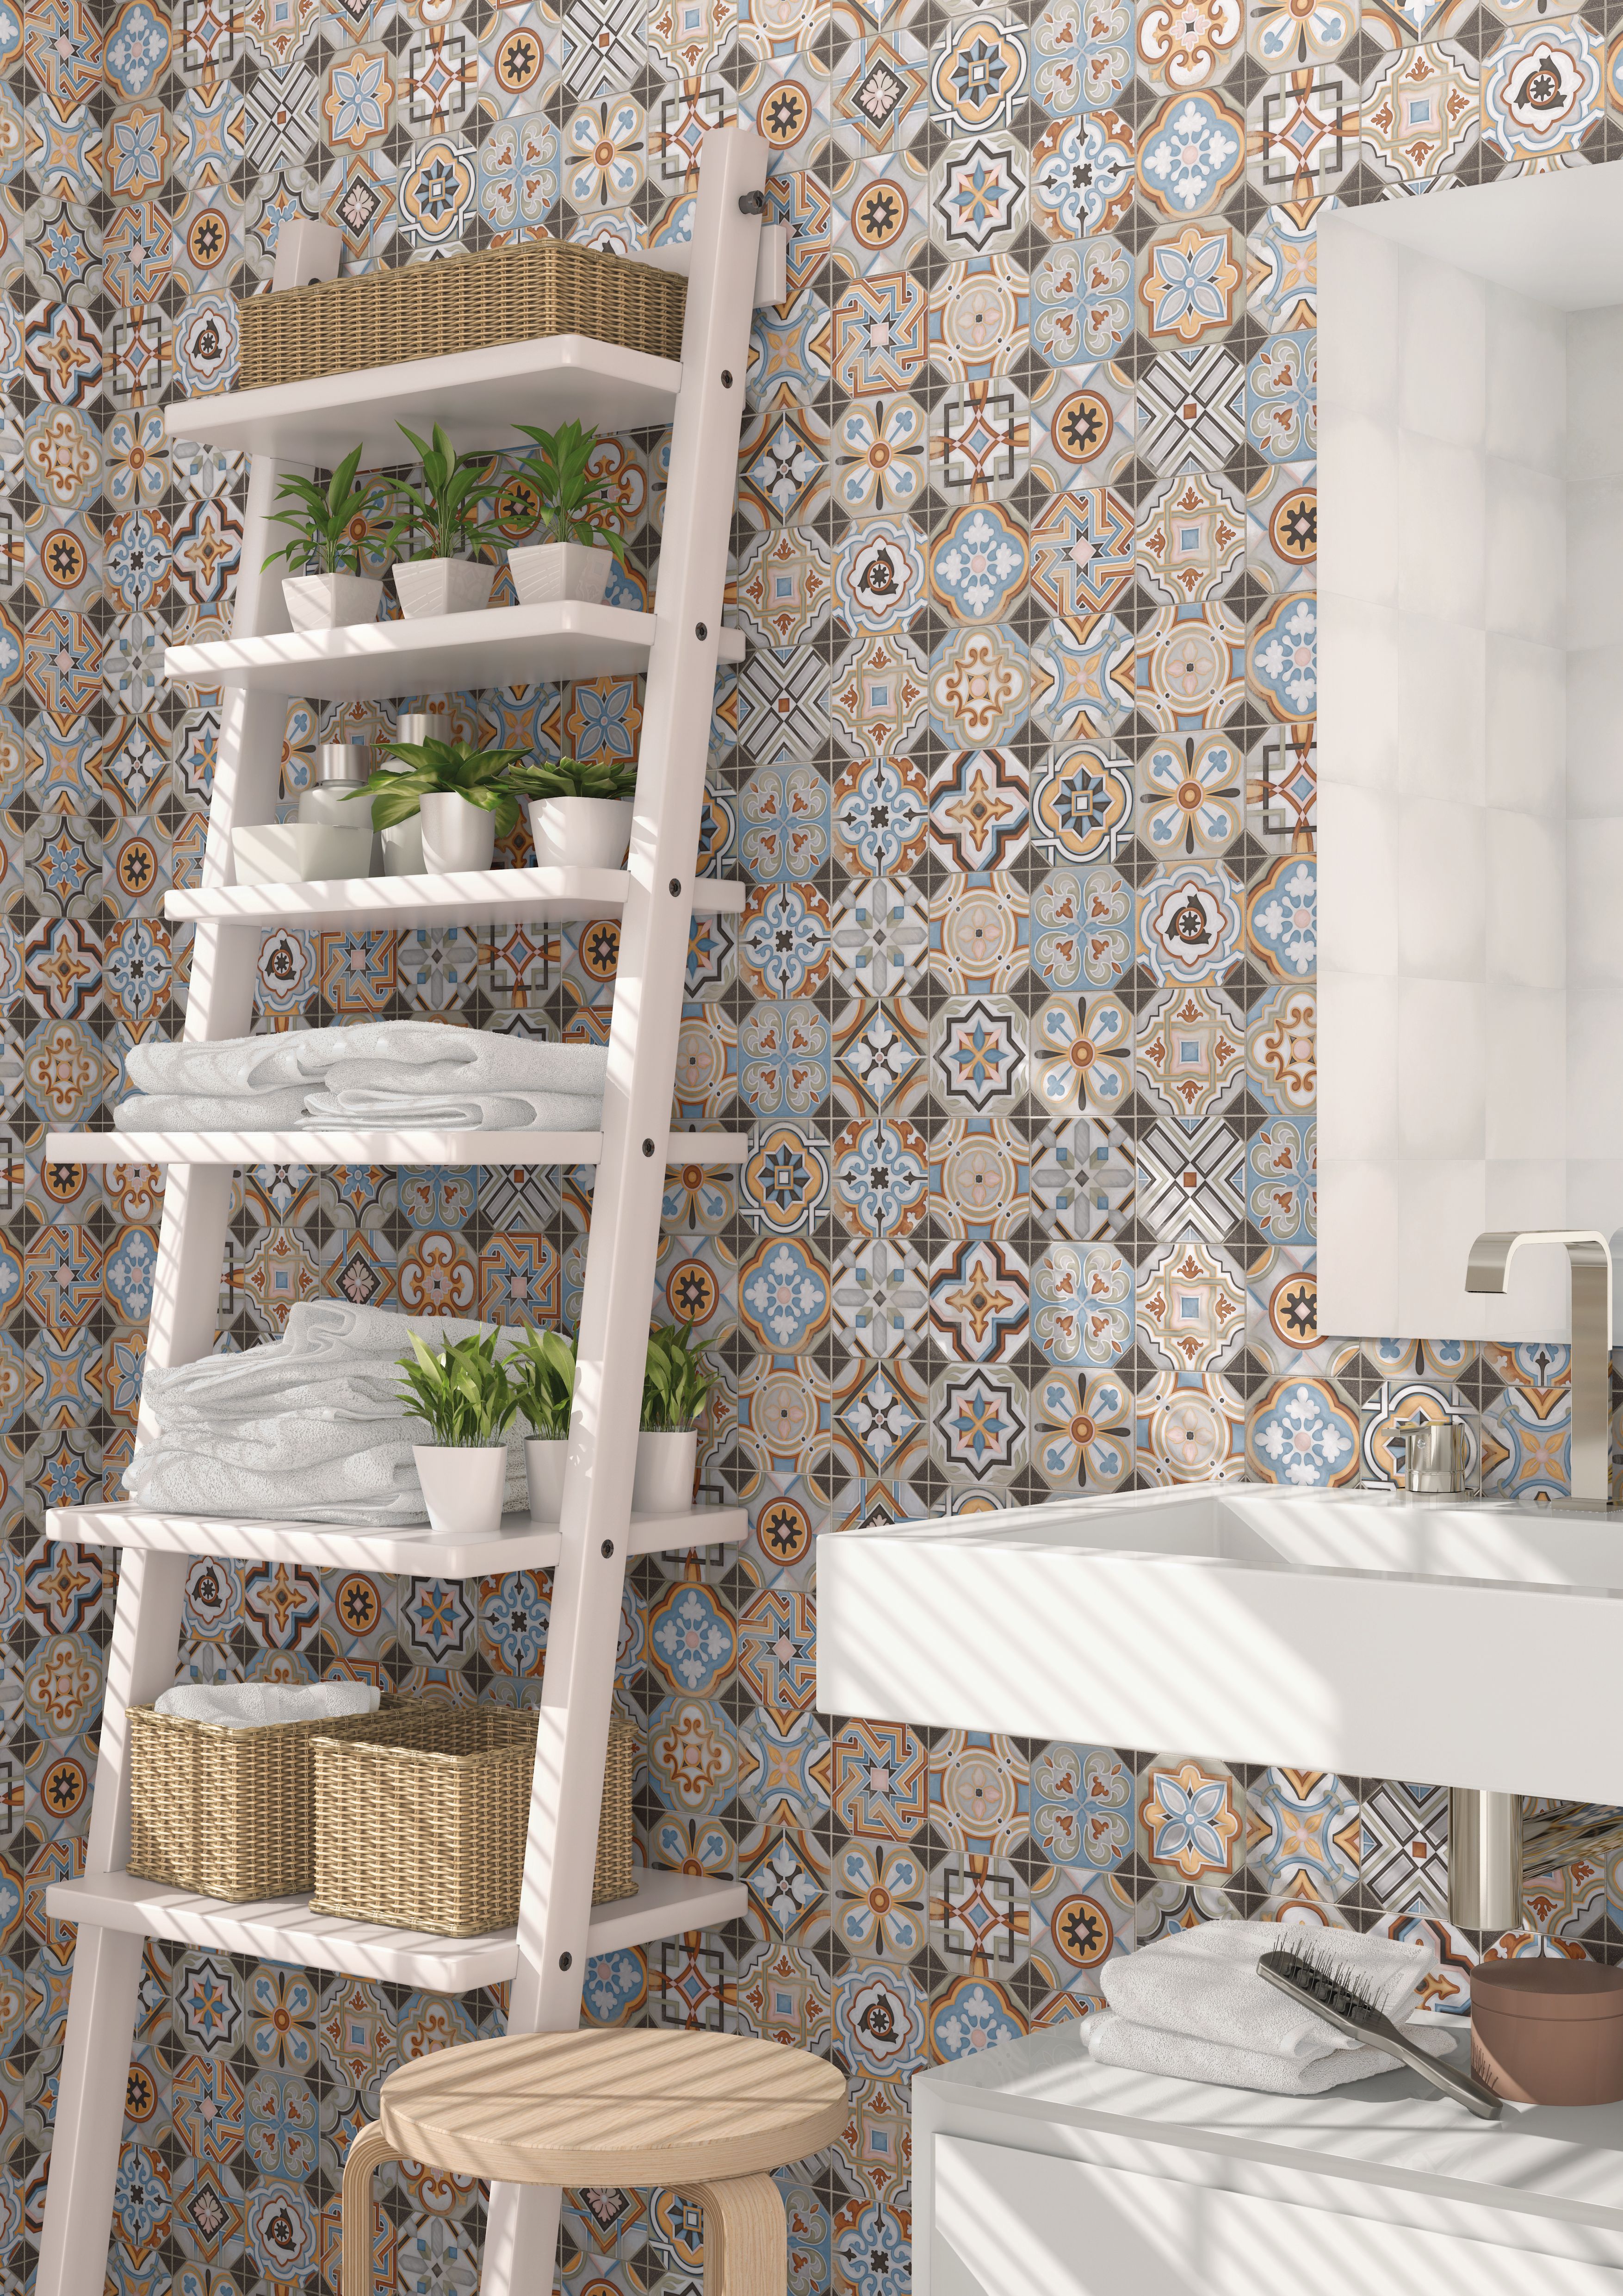 Image of Wickes Central Park Patterned Ceramic Wall & Floor Tile - 316 x 316mm - Sample